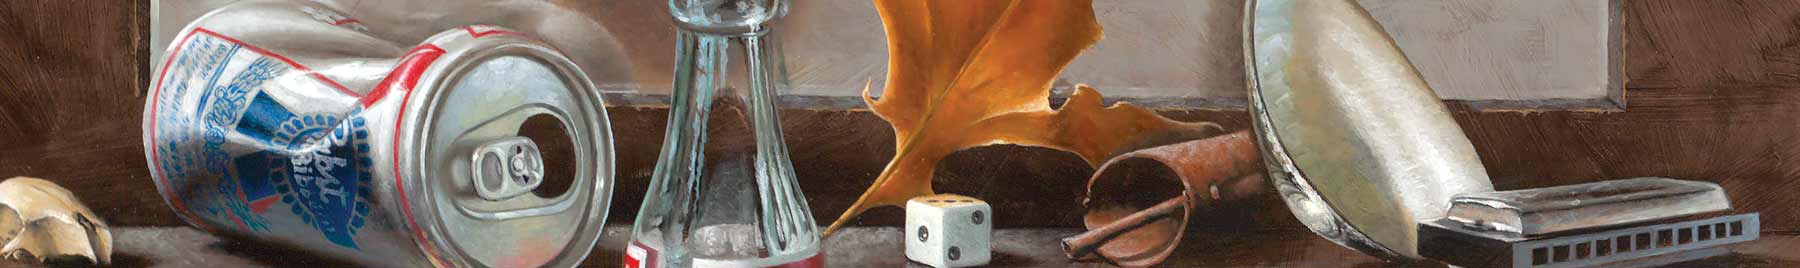 Painting of Curios: Beer can, dice, shell, harmonica, brown leaf